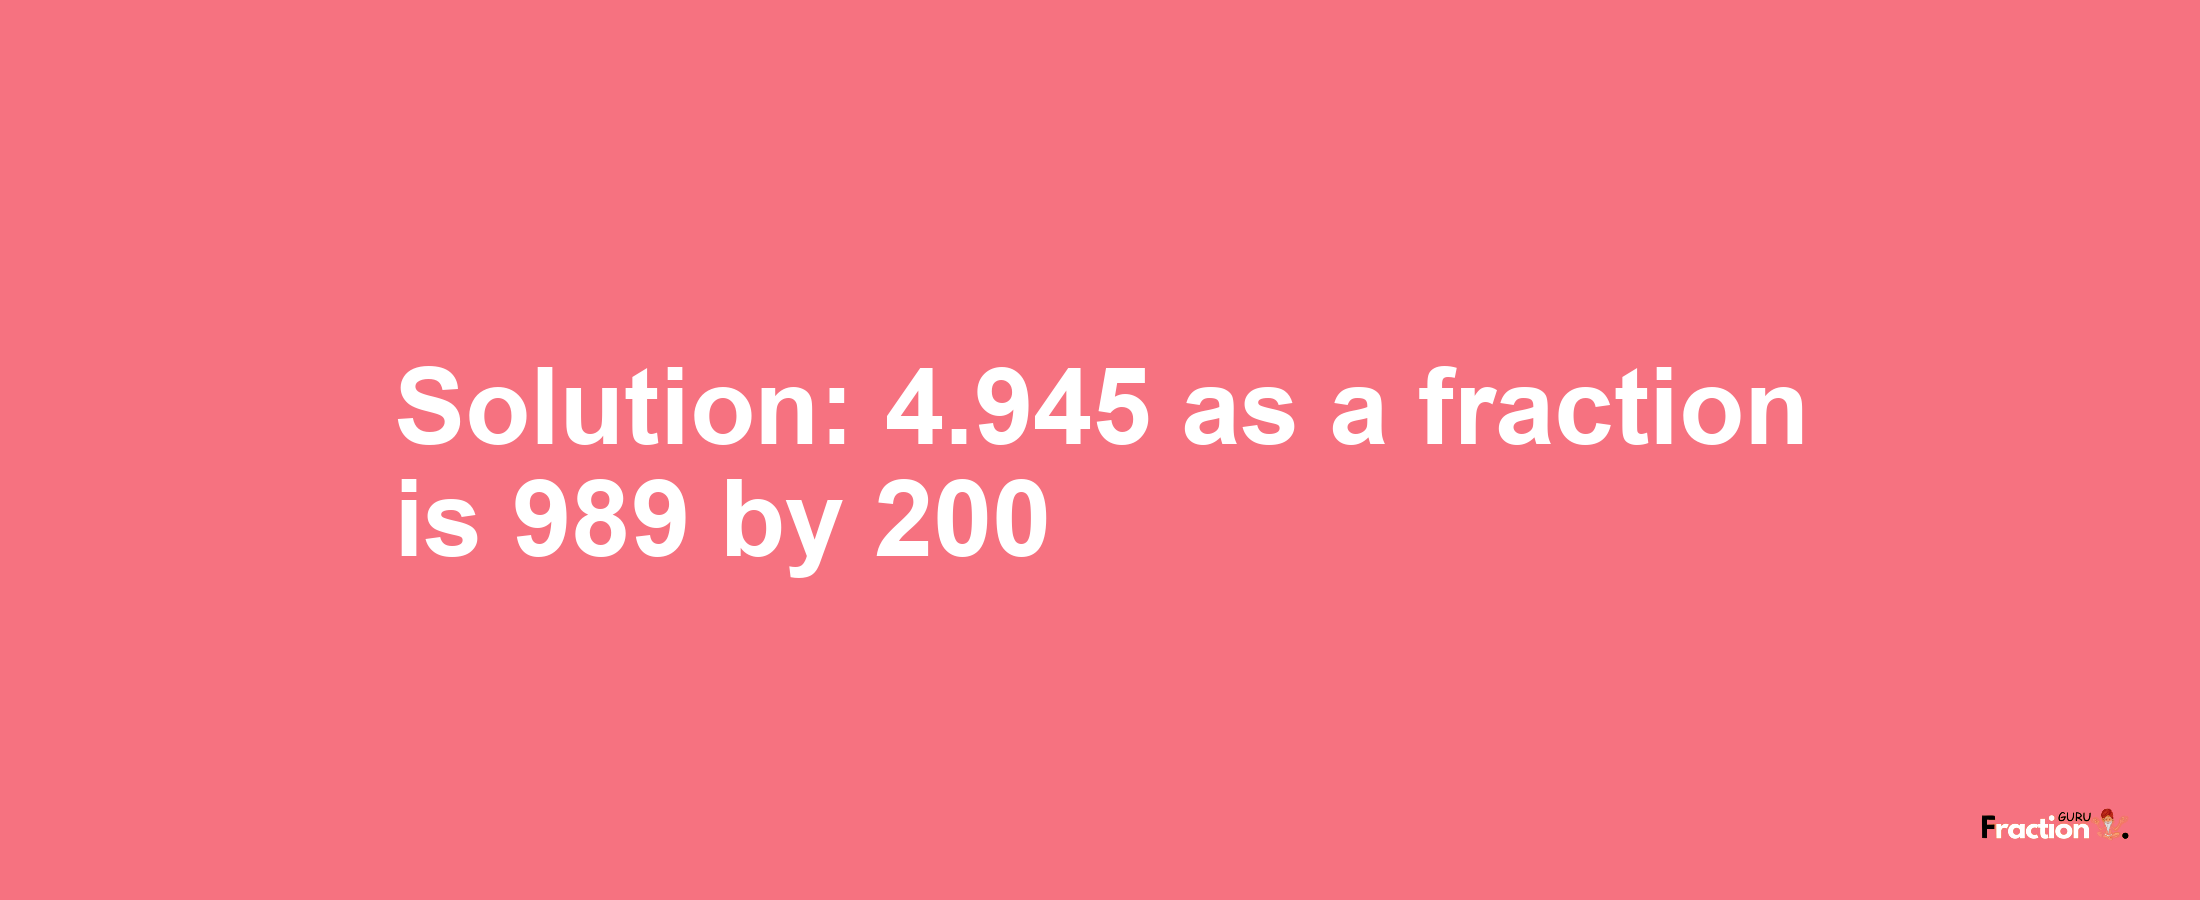 Solution:4.945 as a fraction is 989/200